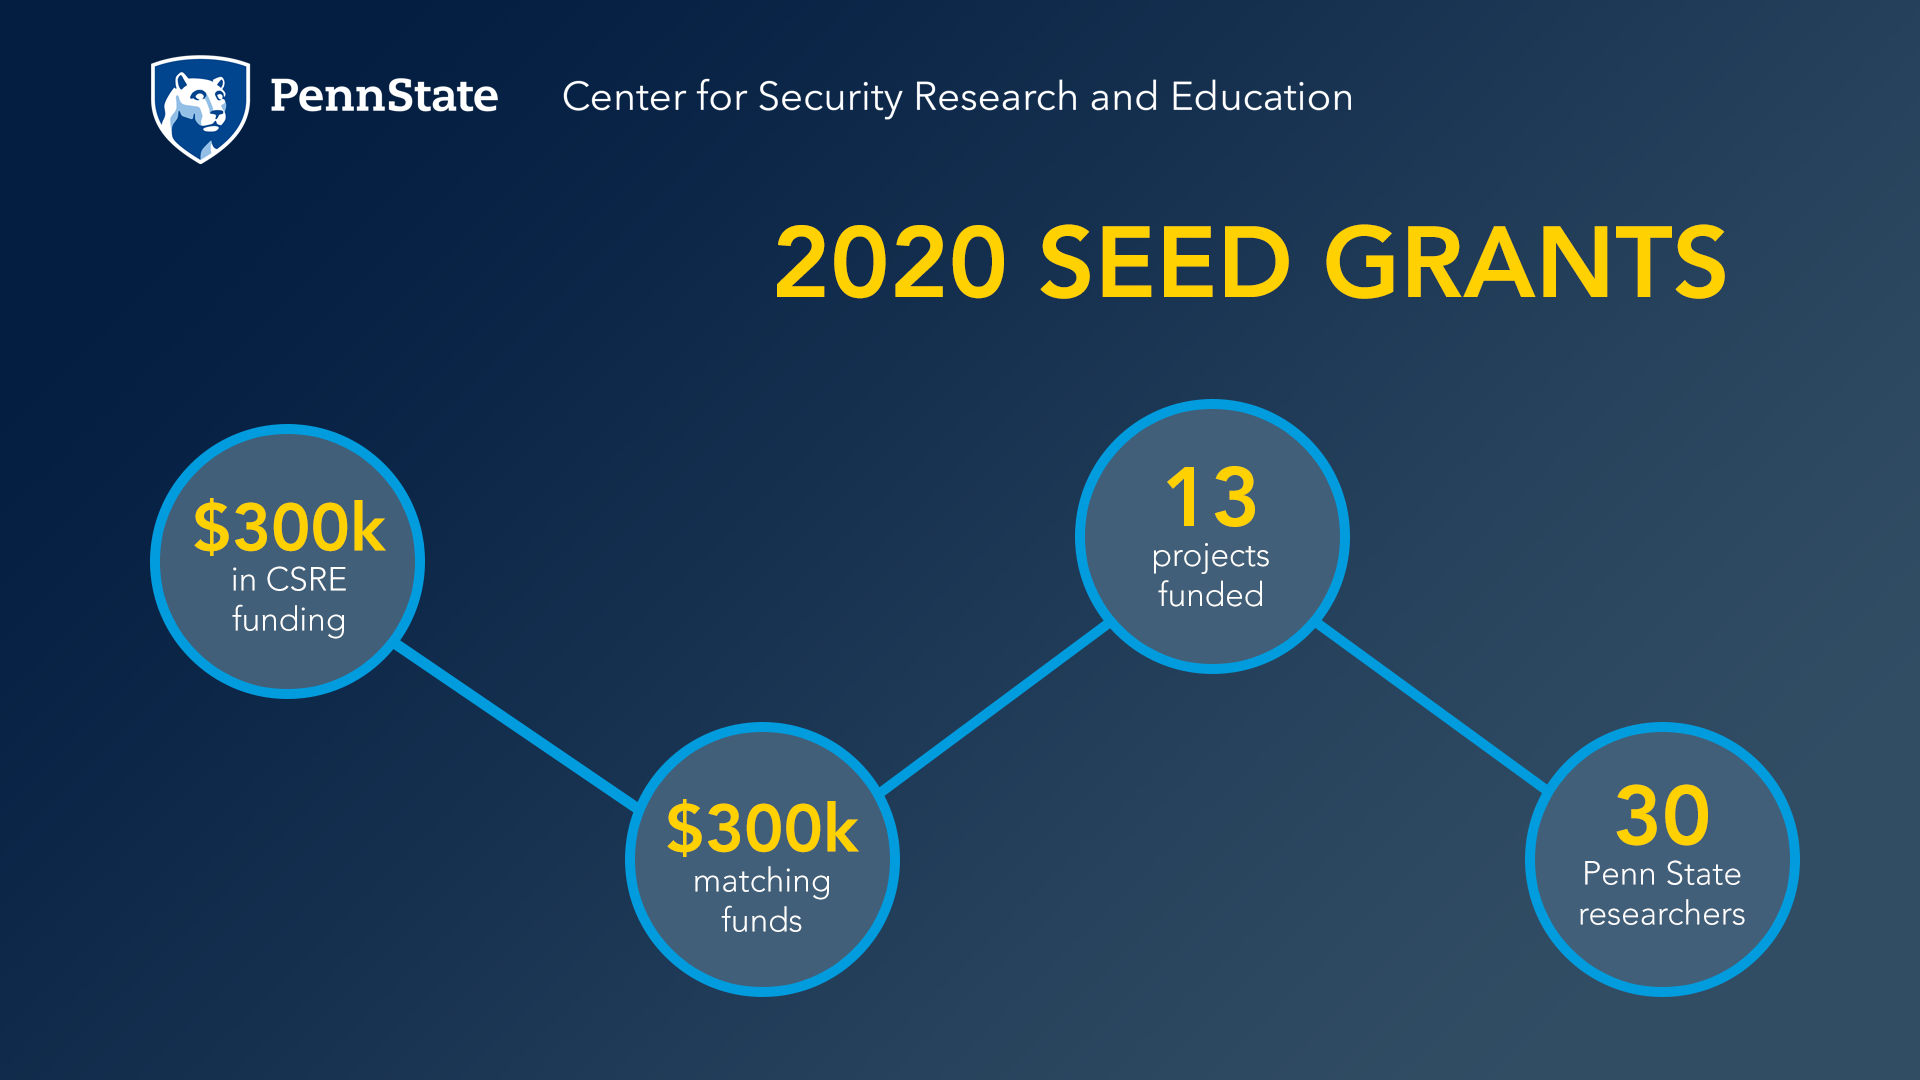 CSRE spring 2020 seed grant infographic